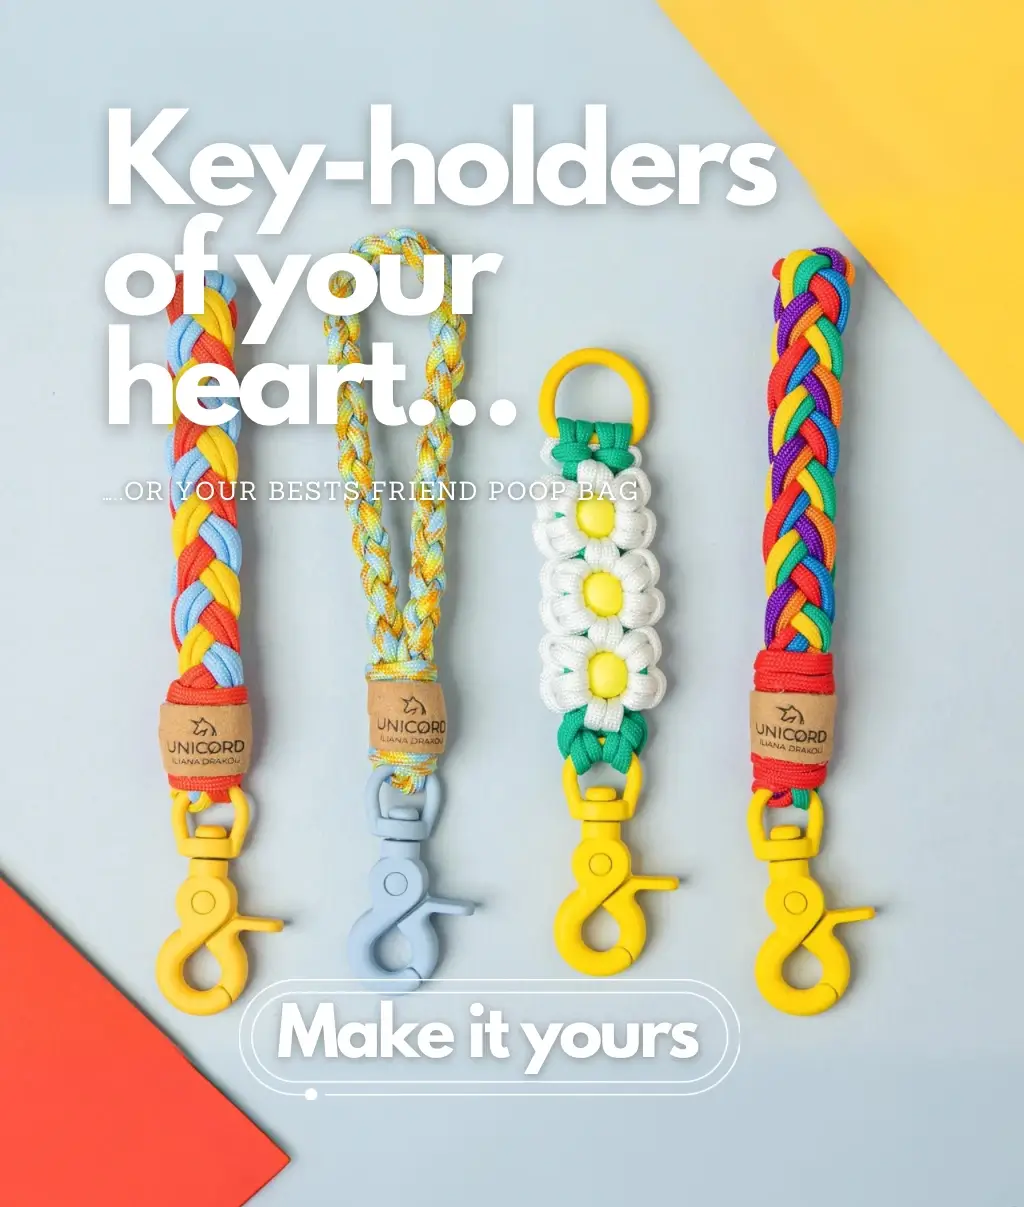 Key-holders of your heart...